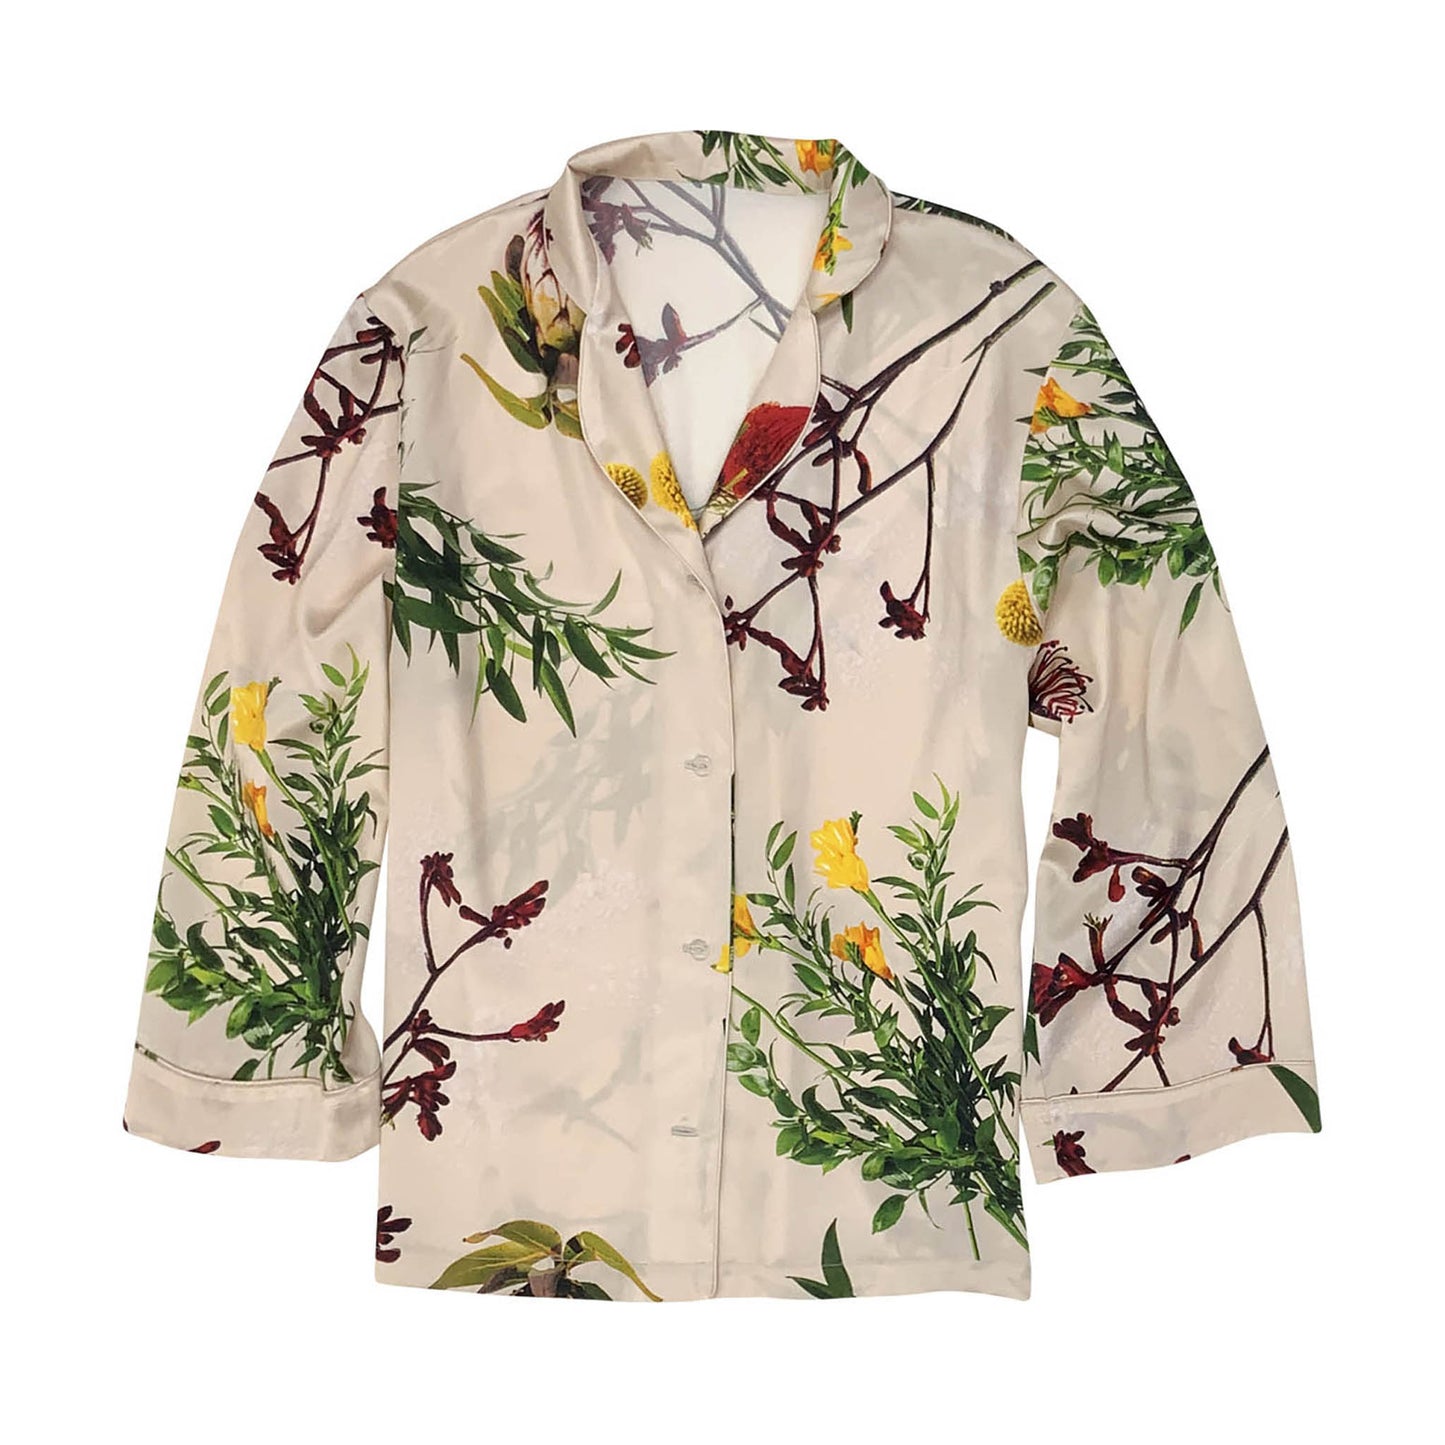 The Flying Flower shirt from NOKAYA is crafted from Mulberry silk and features a relaxed straight cut.